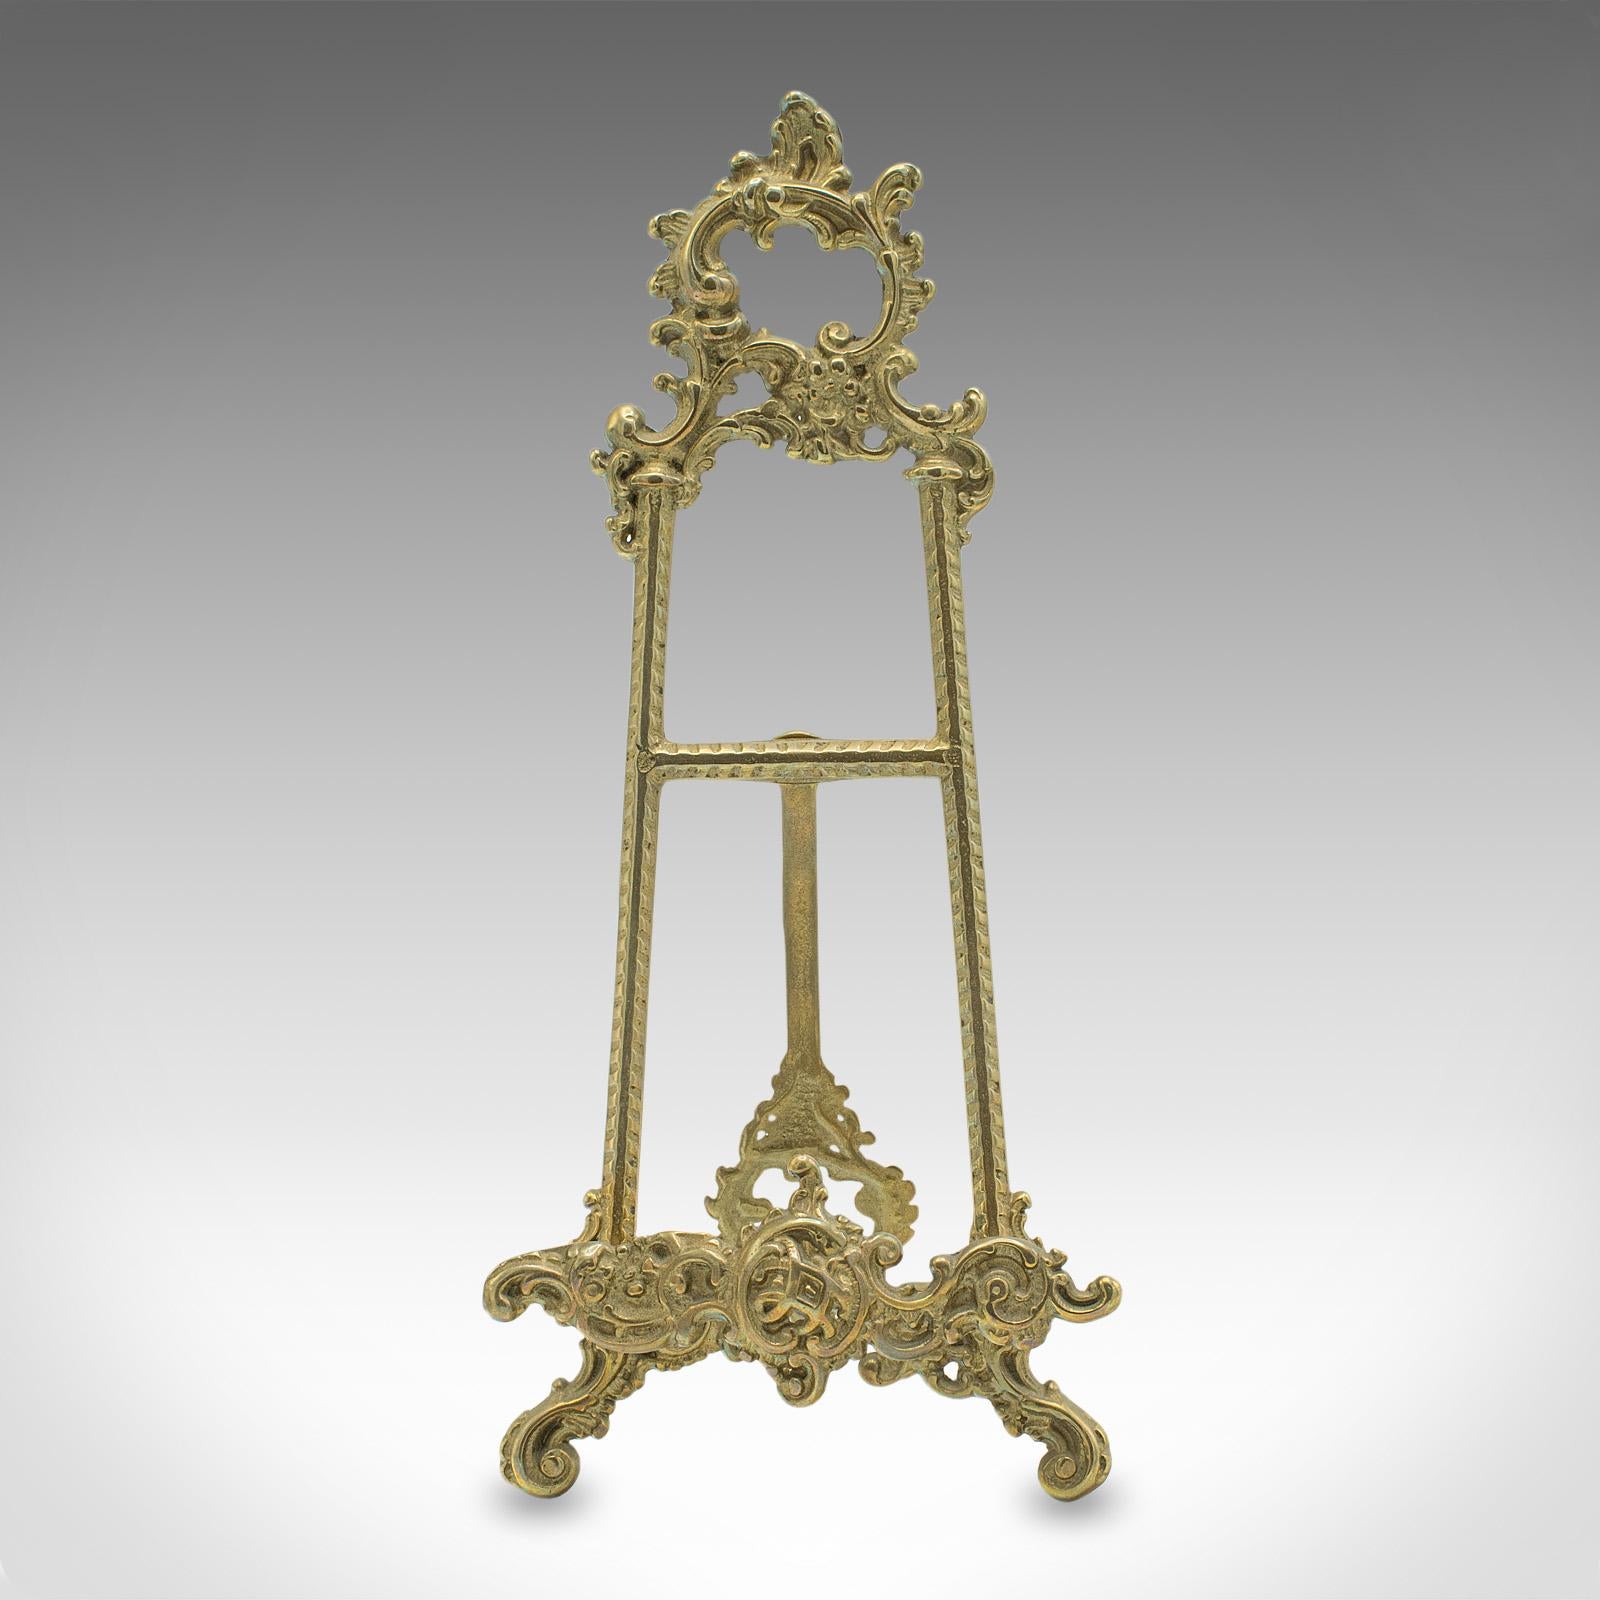 This is a small antique bedside picture stand. An English, brass novel rest in Art Nouveau taste, dating to the early 20th century, circa 1920.

A delightful way to host a picture of a loved one on your nightstand
Displays a desirable aged patina